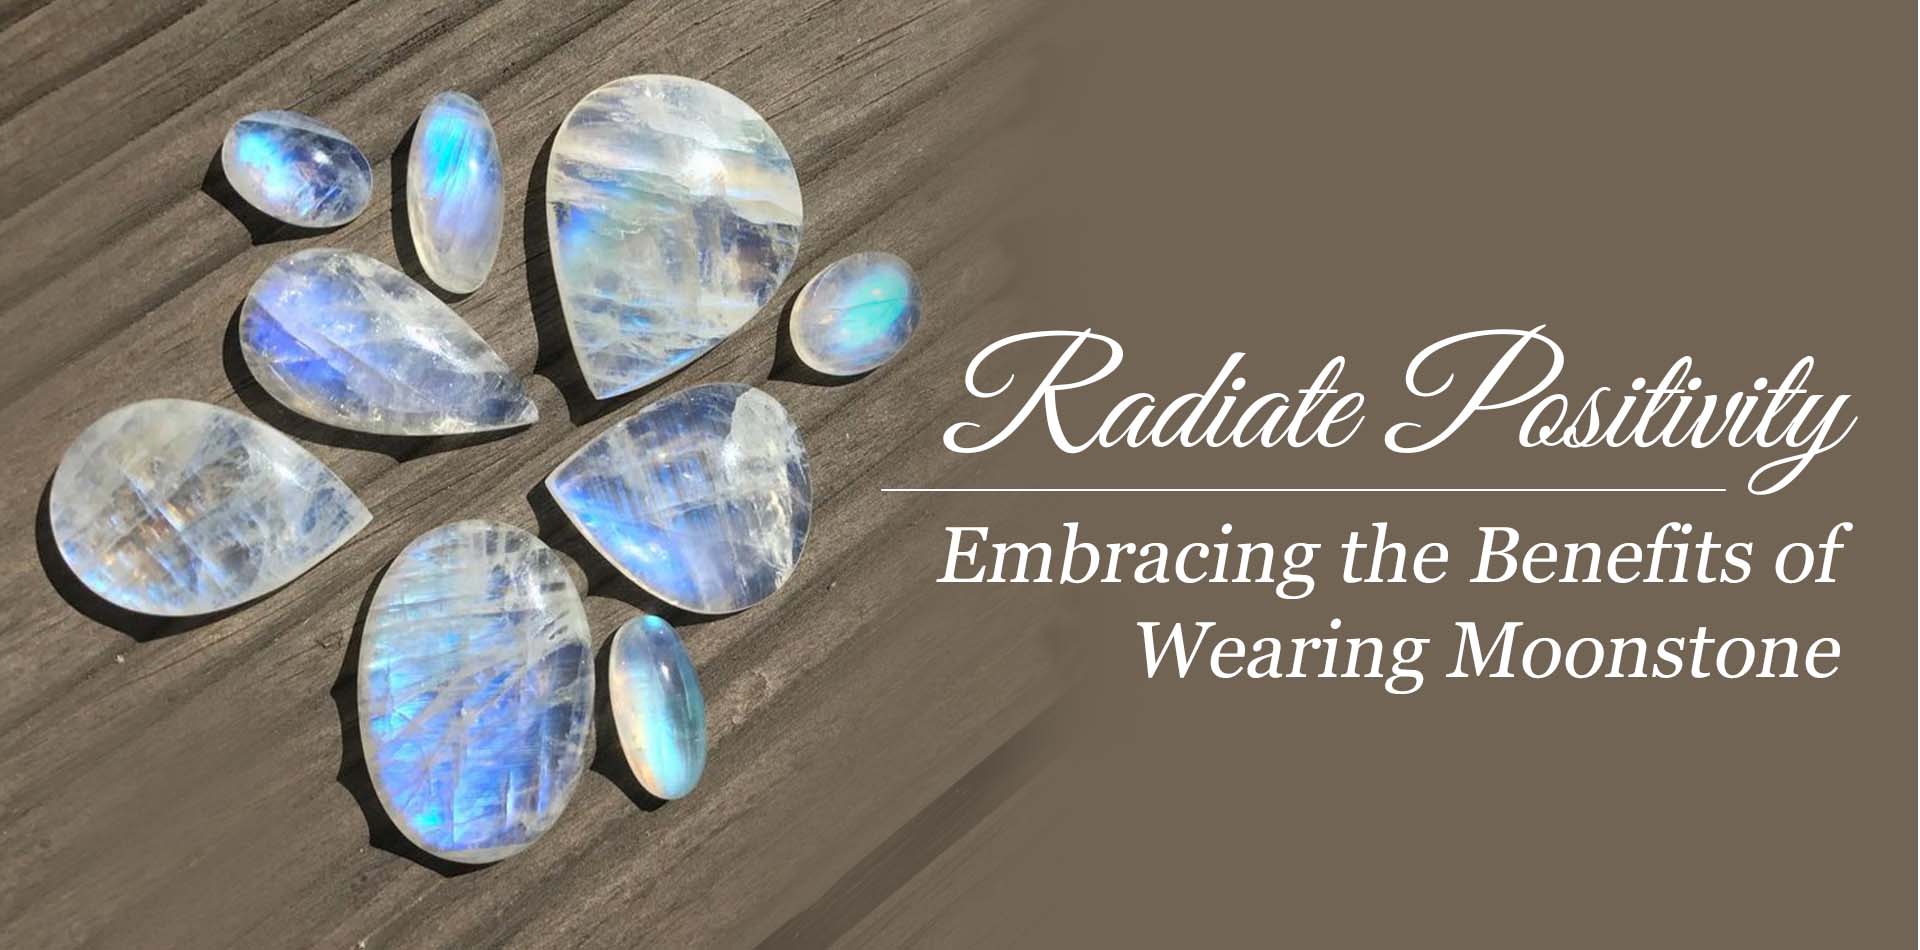 Radiate Positivity: Embracing the Benefits of Wearing Moonstone